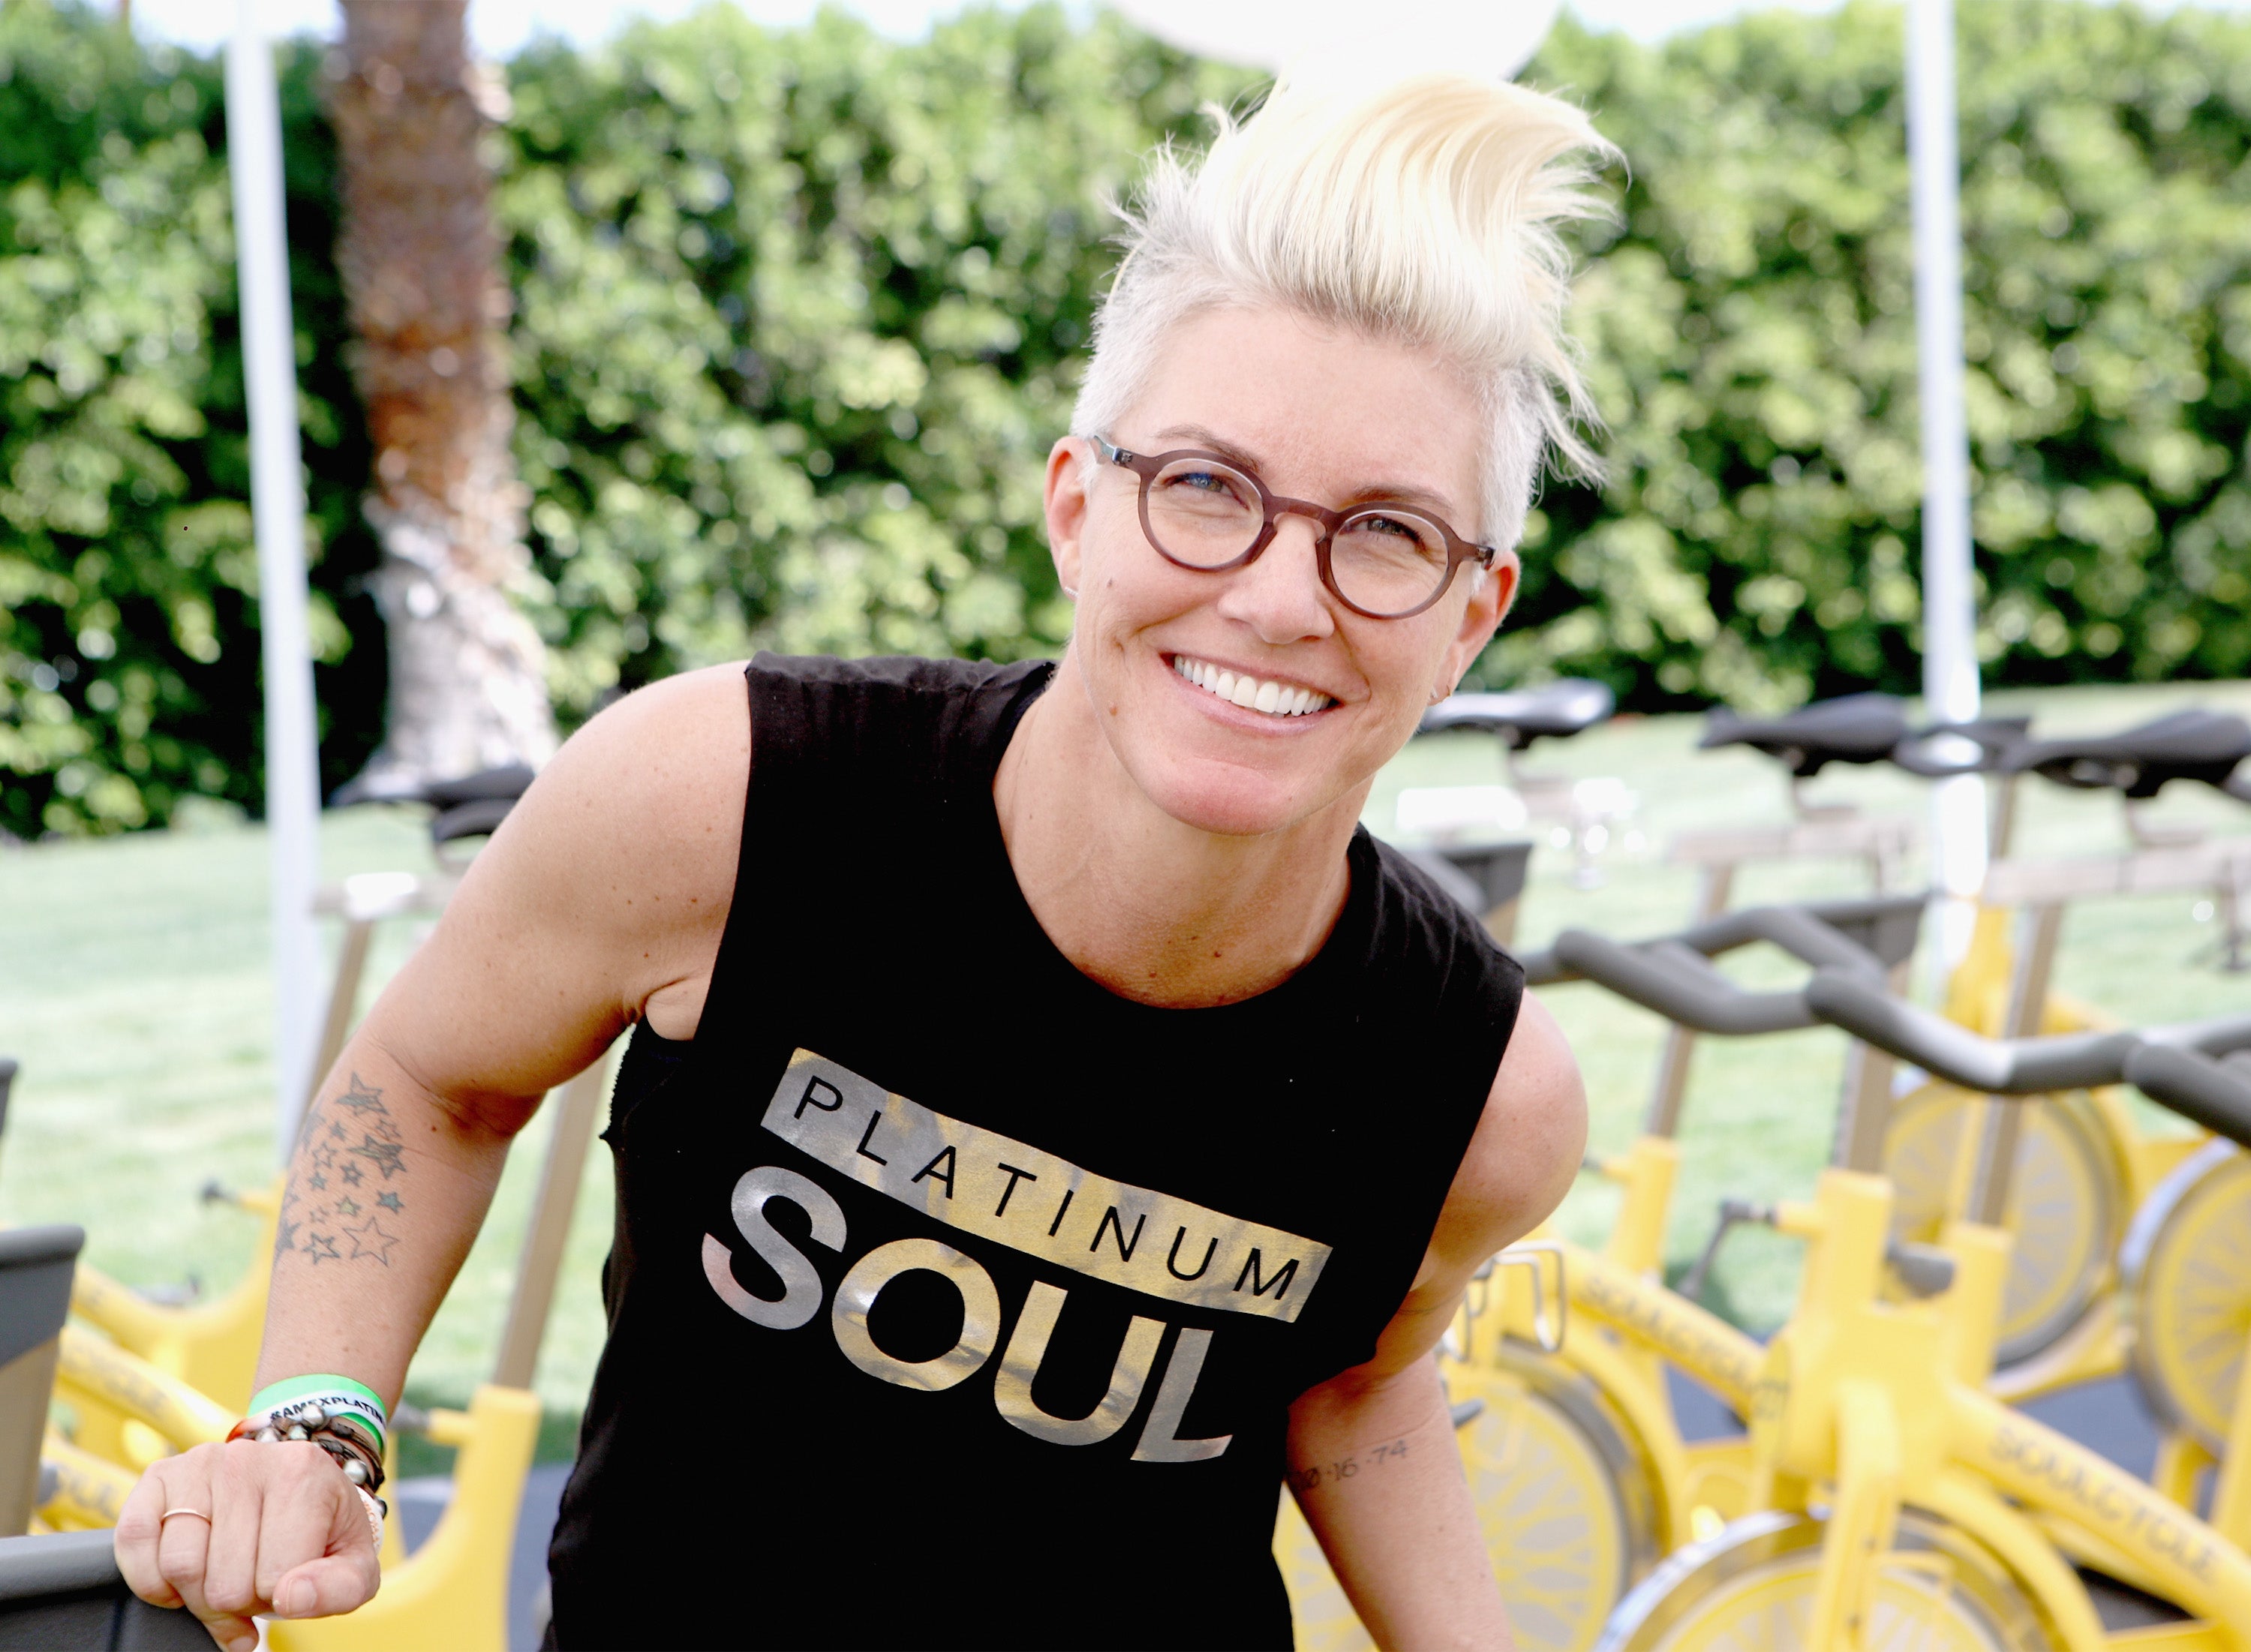 Stacey Griffith, a New York City-based SoulCycle instructor, jumped the line by claiming she’s a teacher